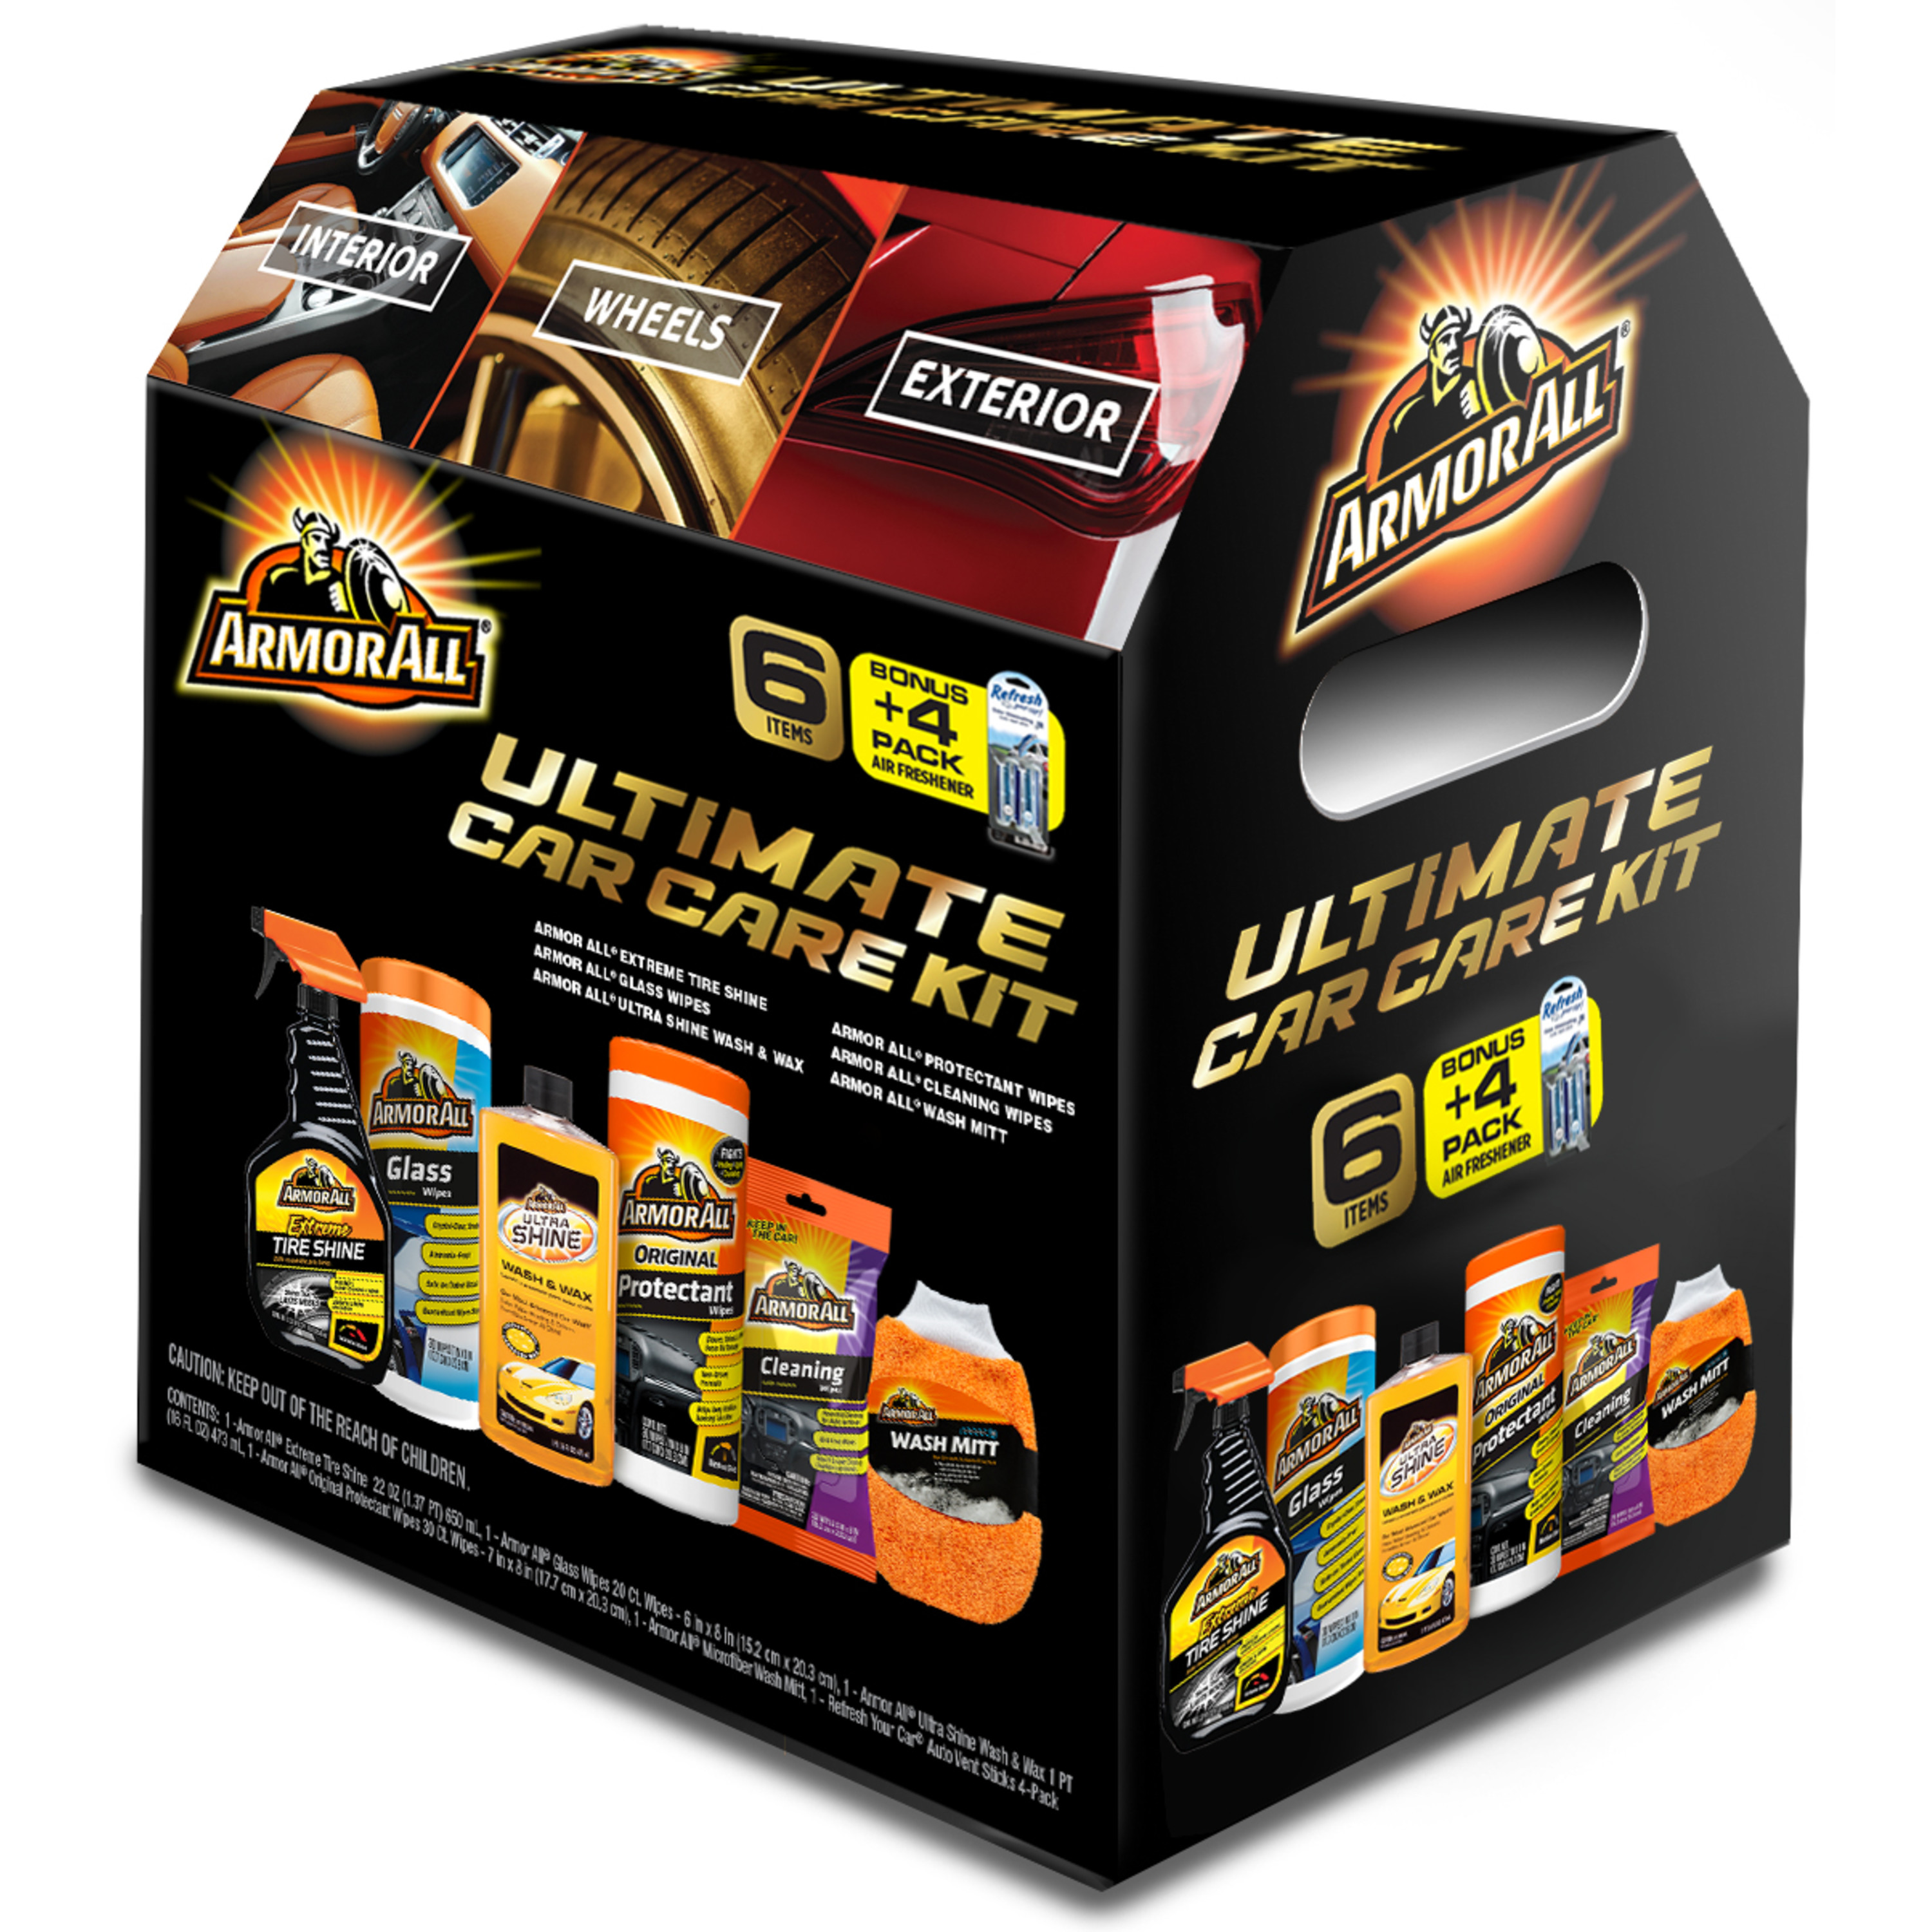 Armor All Ultimate Car Care Kit for At-Home Car Maintenance – 1